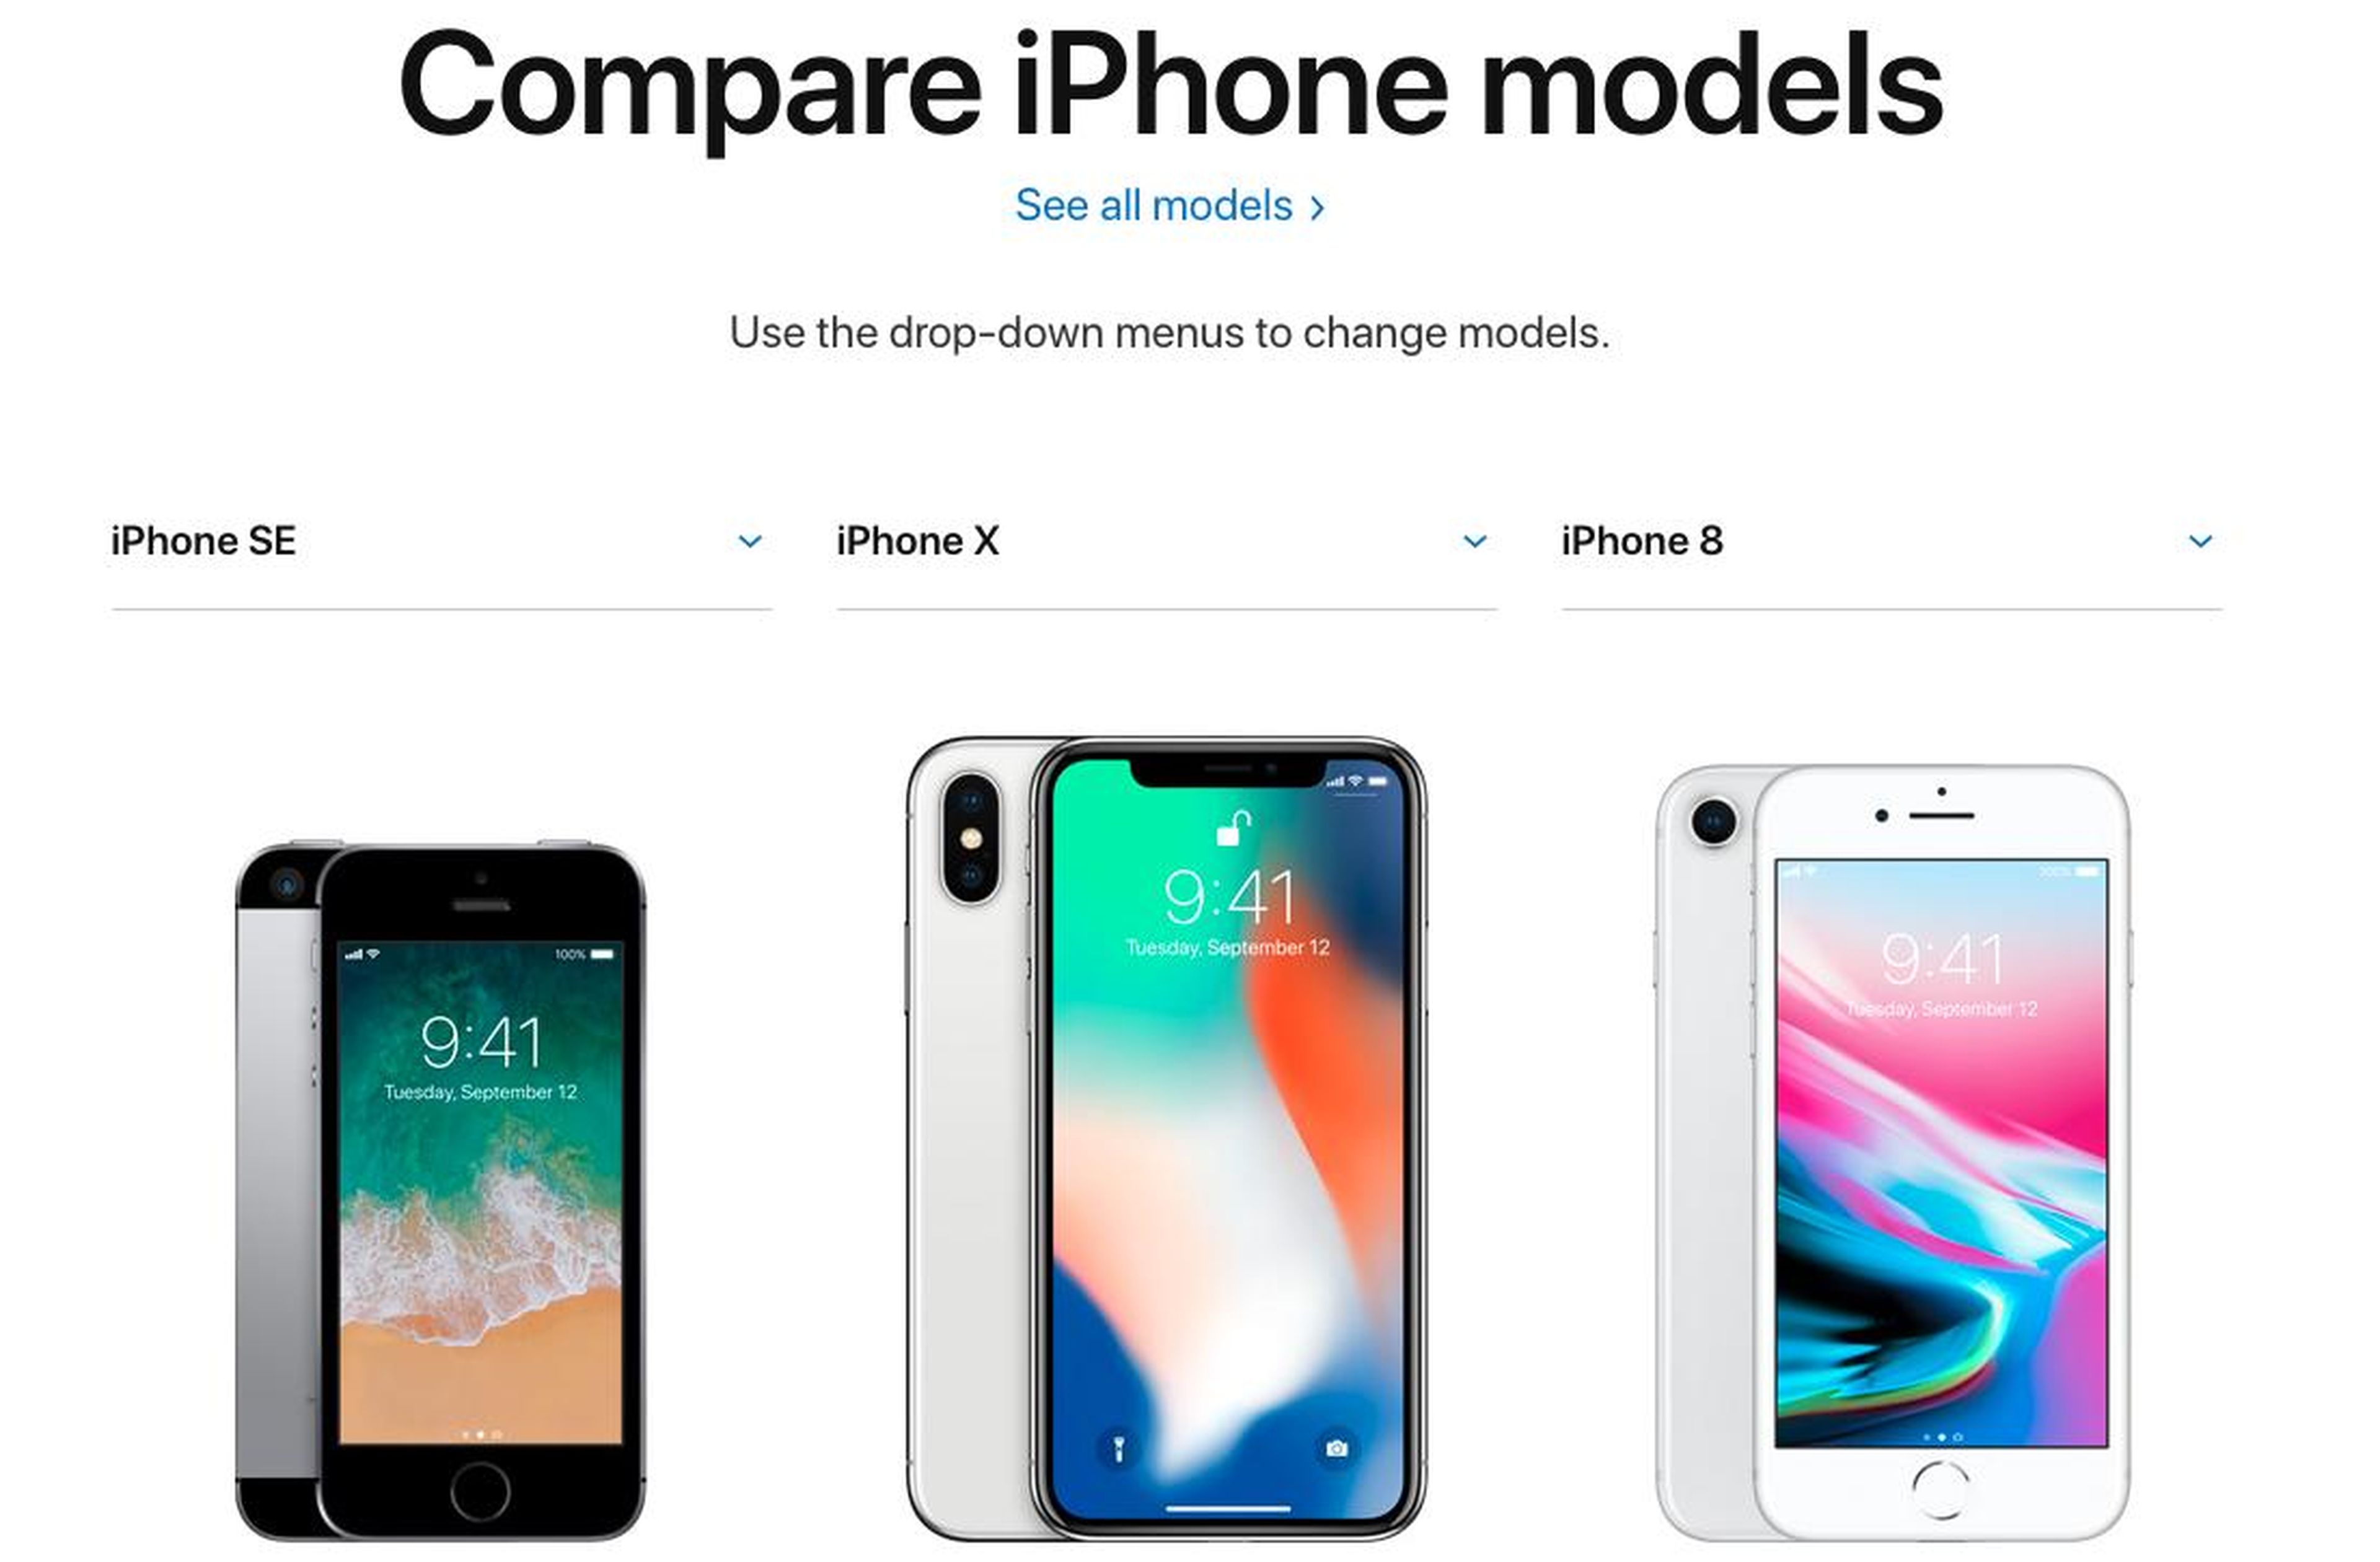 BONUS: Compare different iPhone models super easily with Apple's tool.